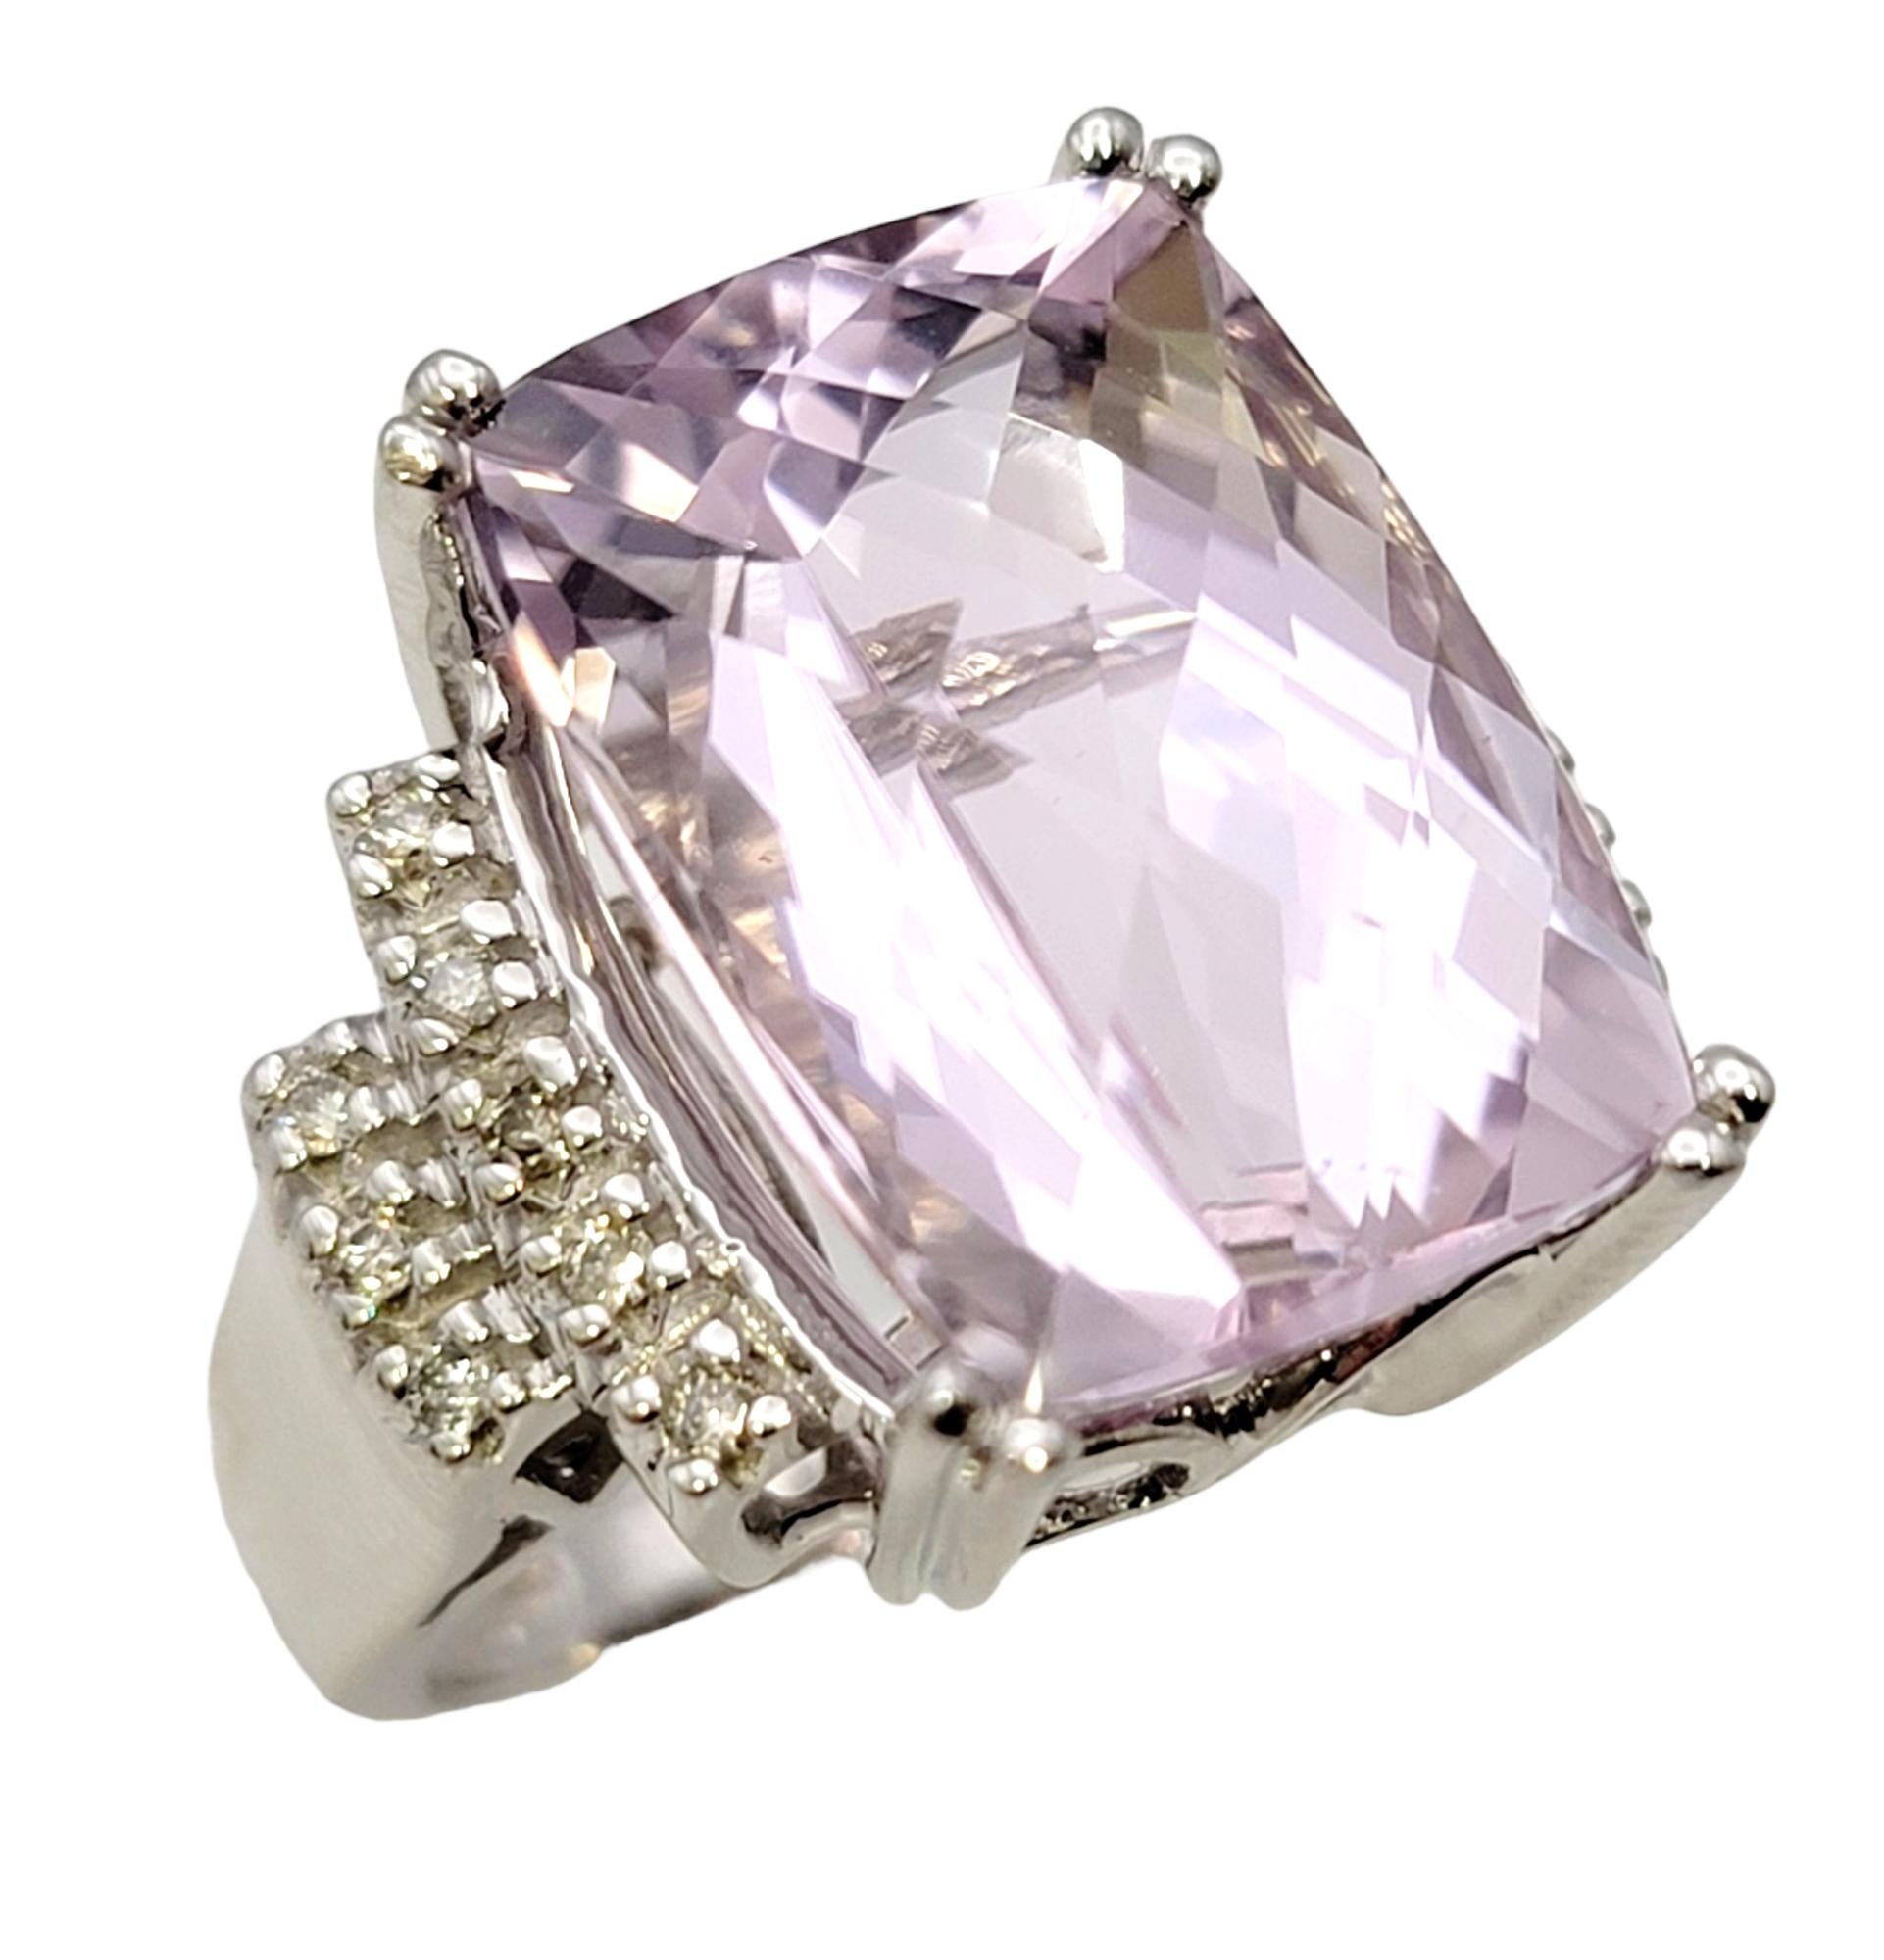 Ring size: 6.75

This dreamy ring is truly breathtaking! The massive kunzite and diamond cocktail ring will fill your finger from end to end with sensational sparkle. It is an absolutely stunning, eye-catching piece that makes a bold statement with